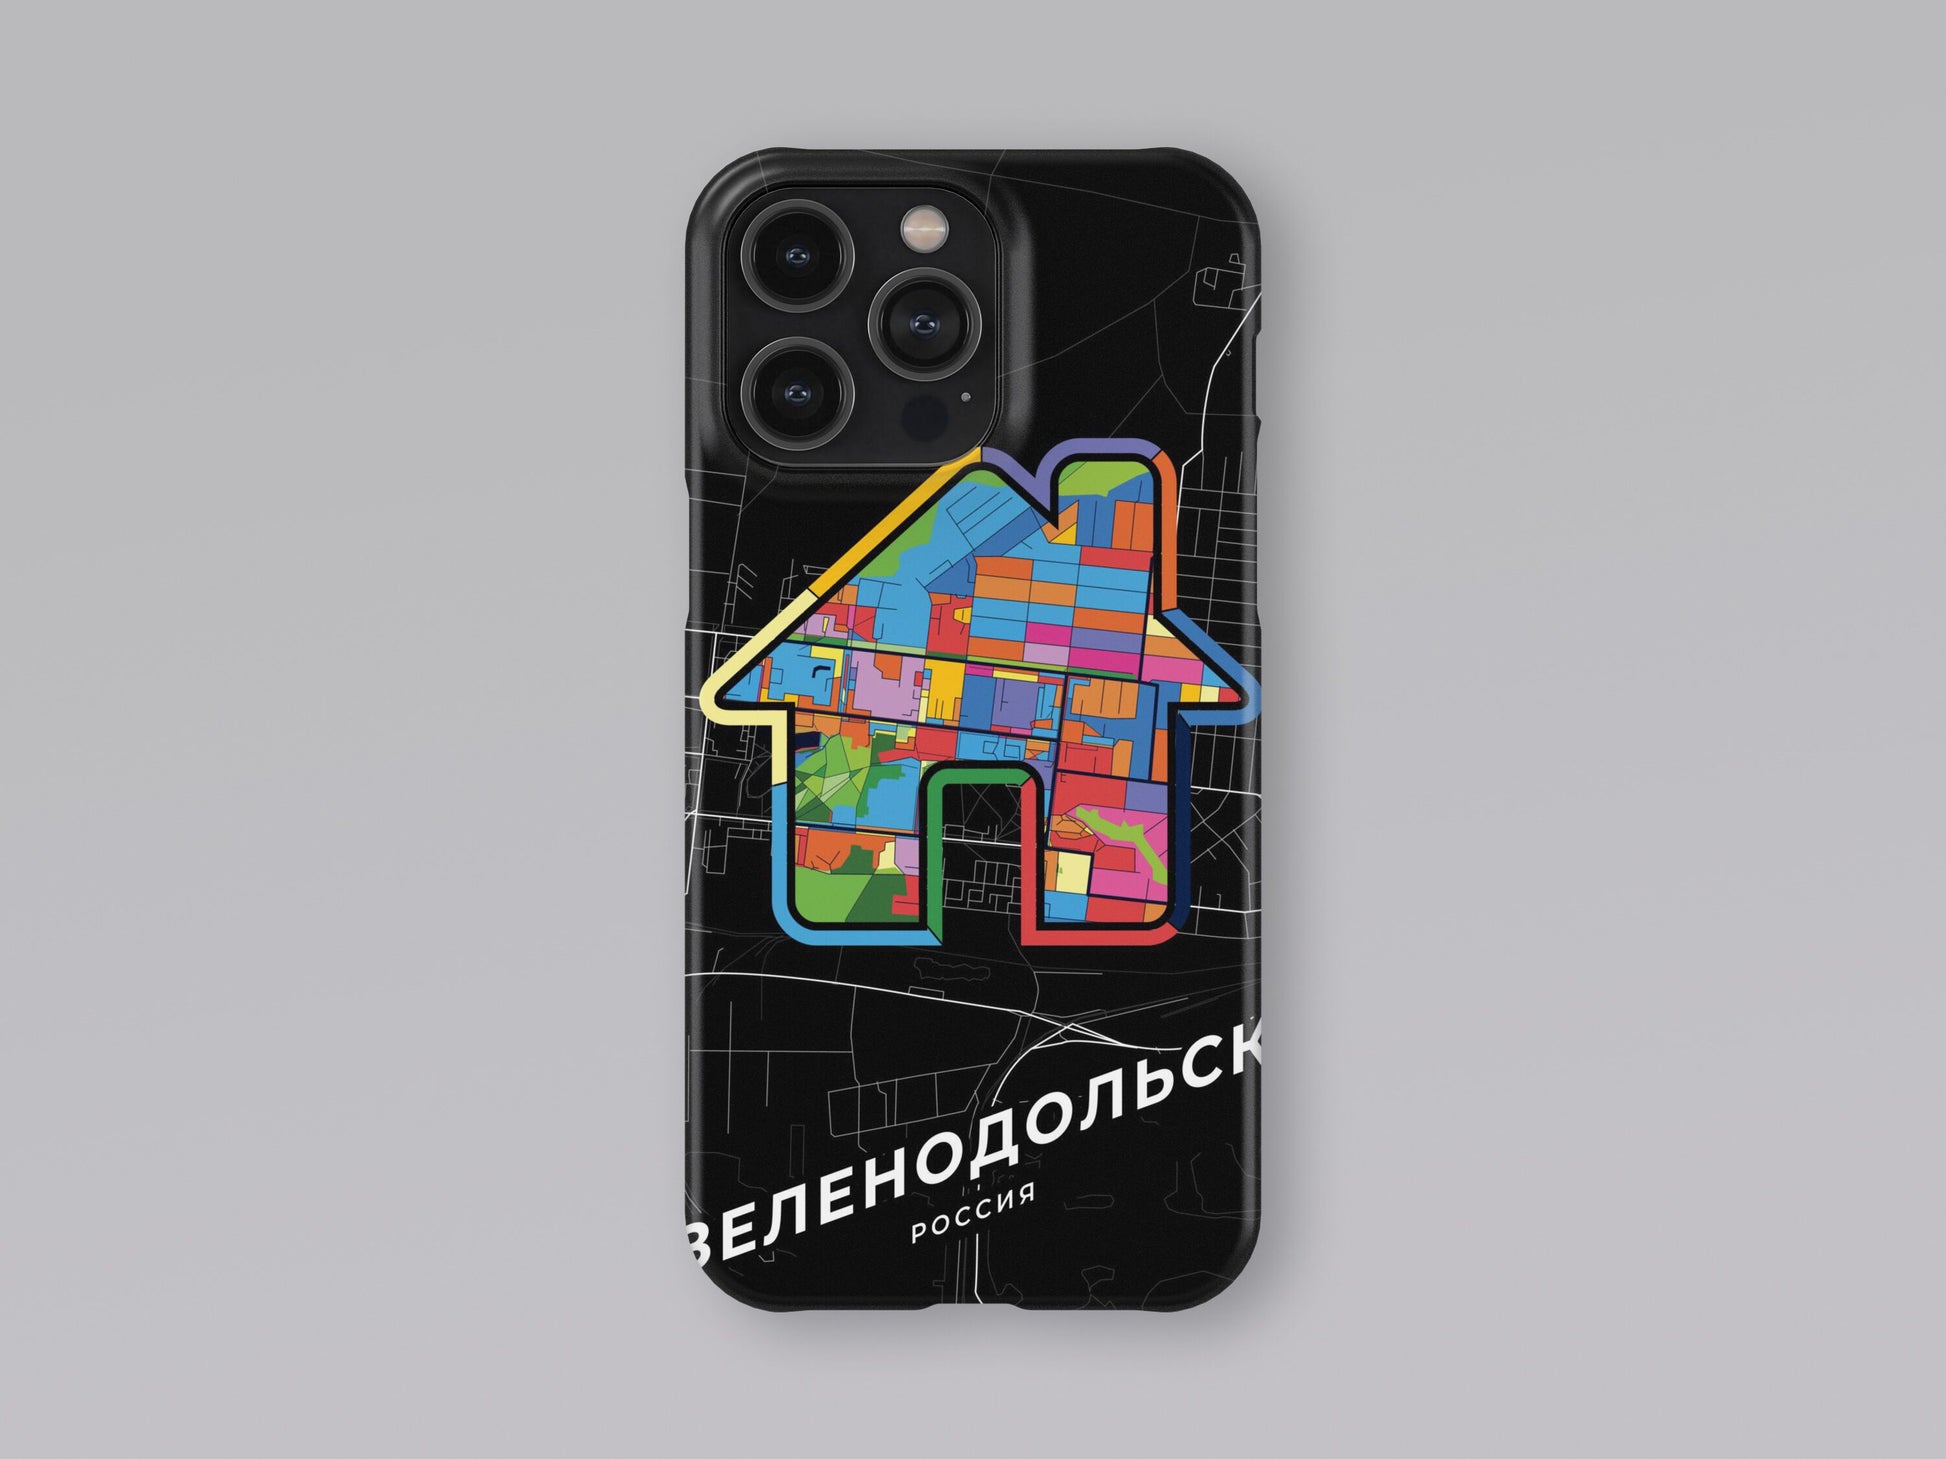 Zelenodolsk Russia slim phone case with colorful icon 3